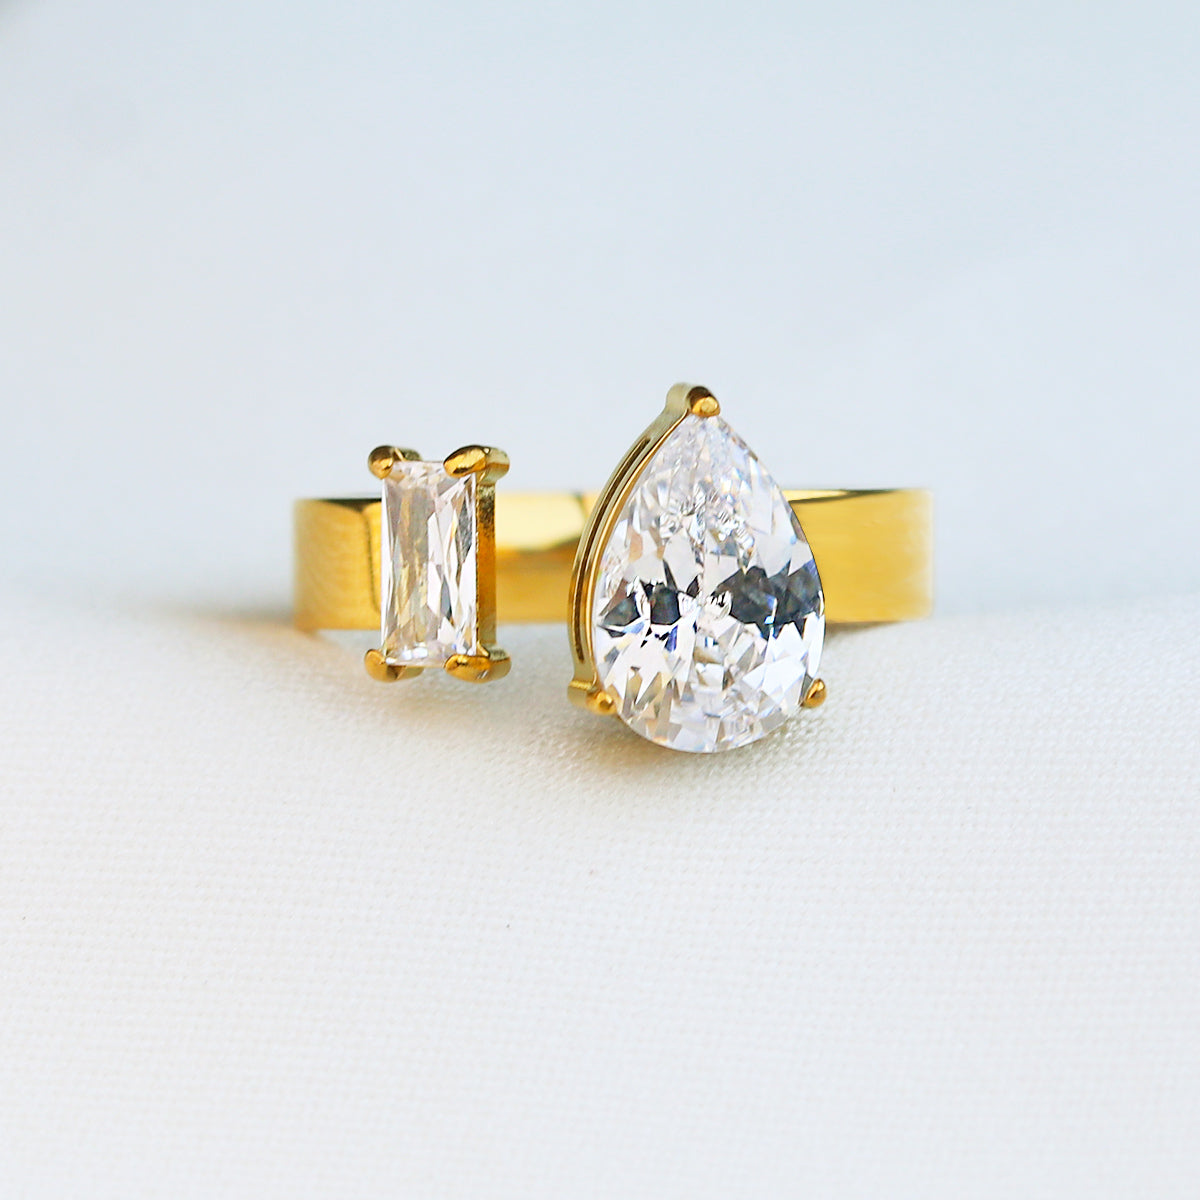 Cubic zirconias 14k gold plated over solid .925 sterling silver nickel-free tarnish free